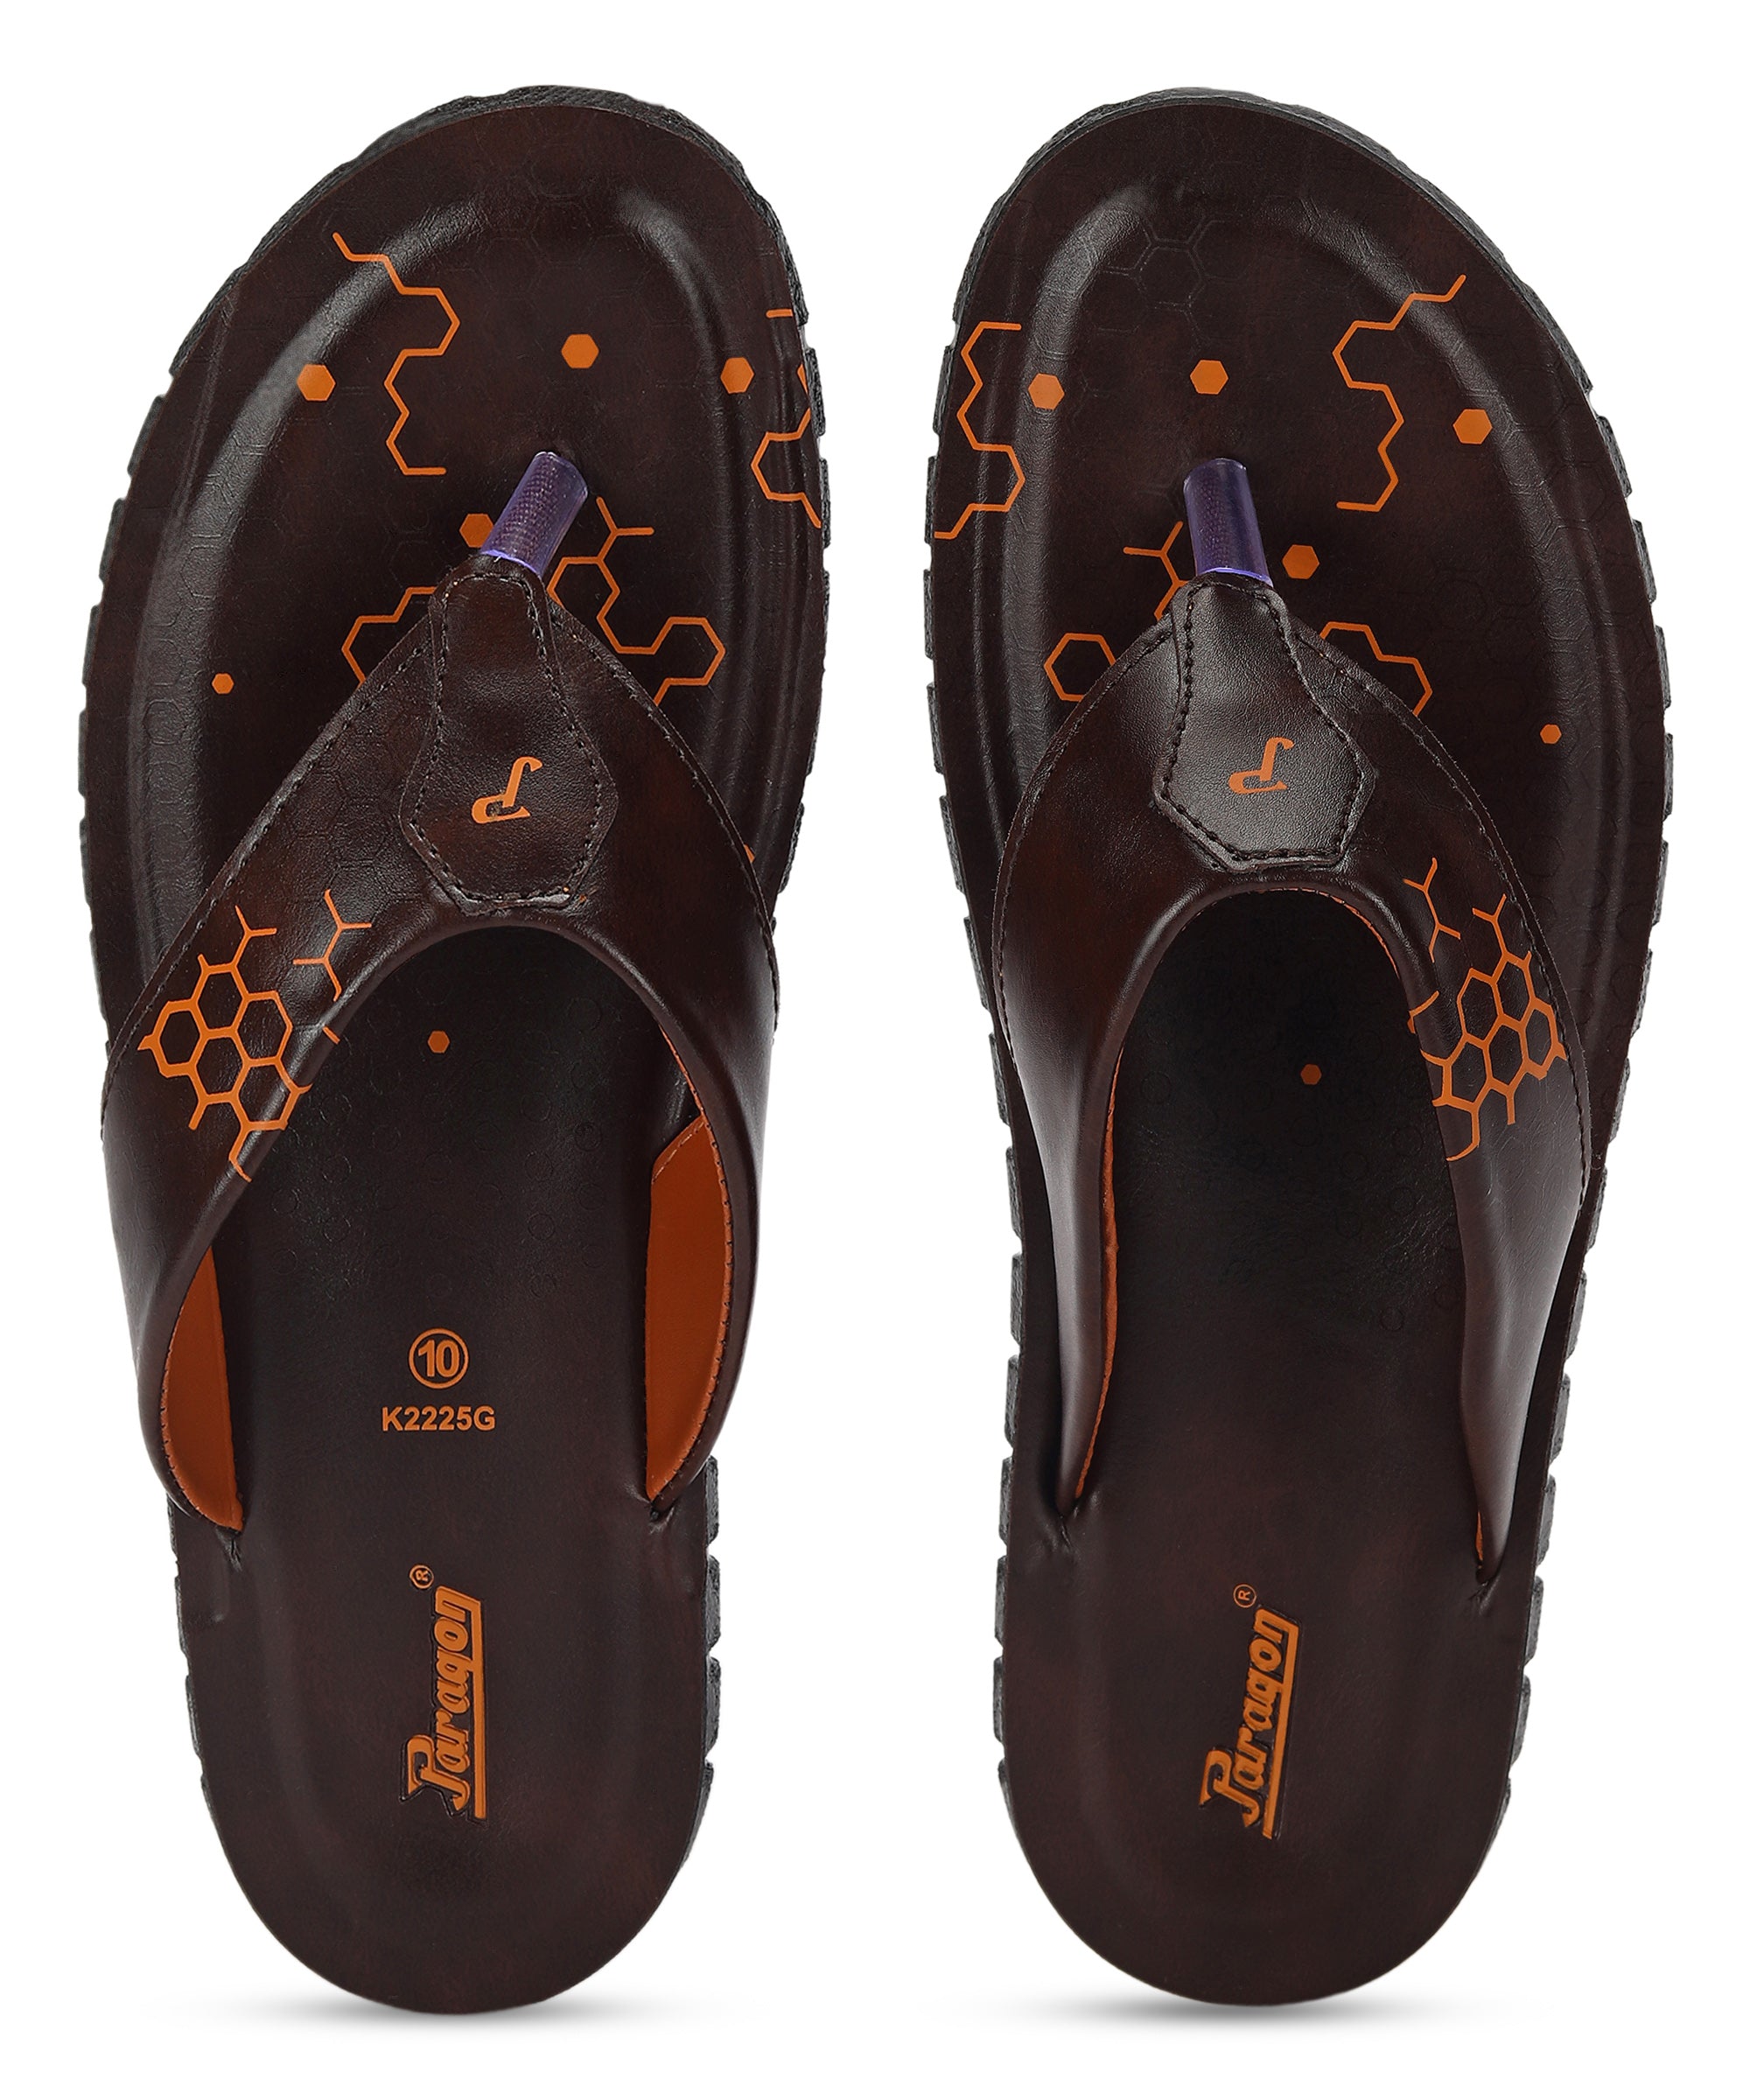 Paragon PUK2225G Men Stylish Sandals | Comfortable Sandals for Daily Outdoor Use | Casual Formal Sandals with Cushioned Soles